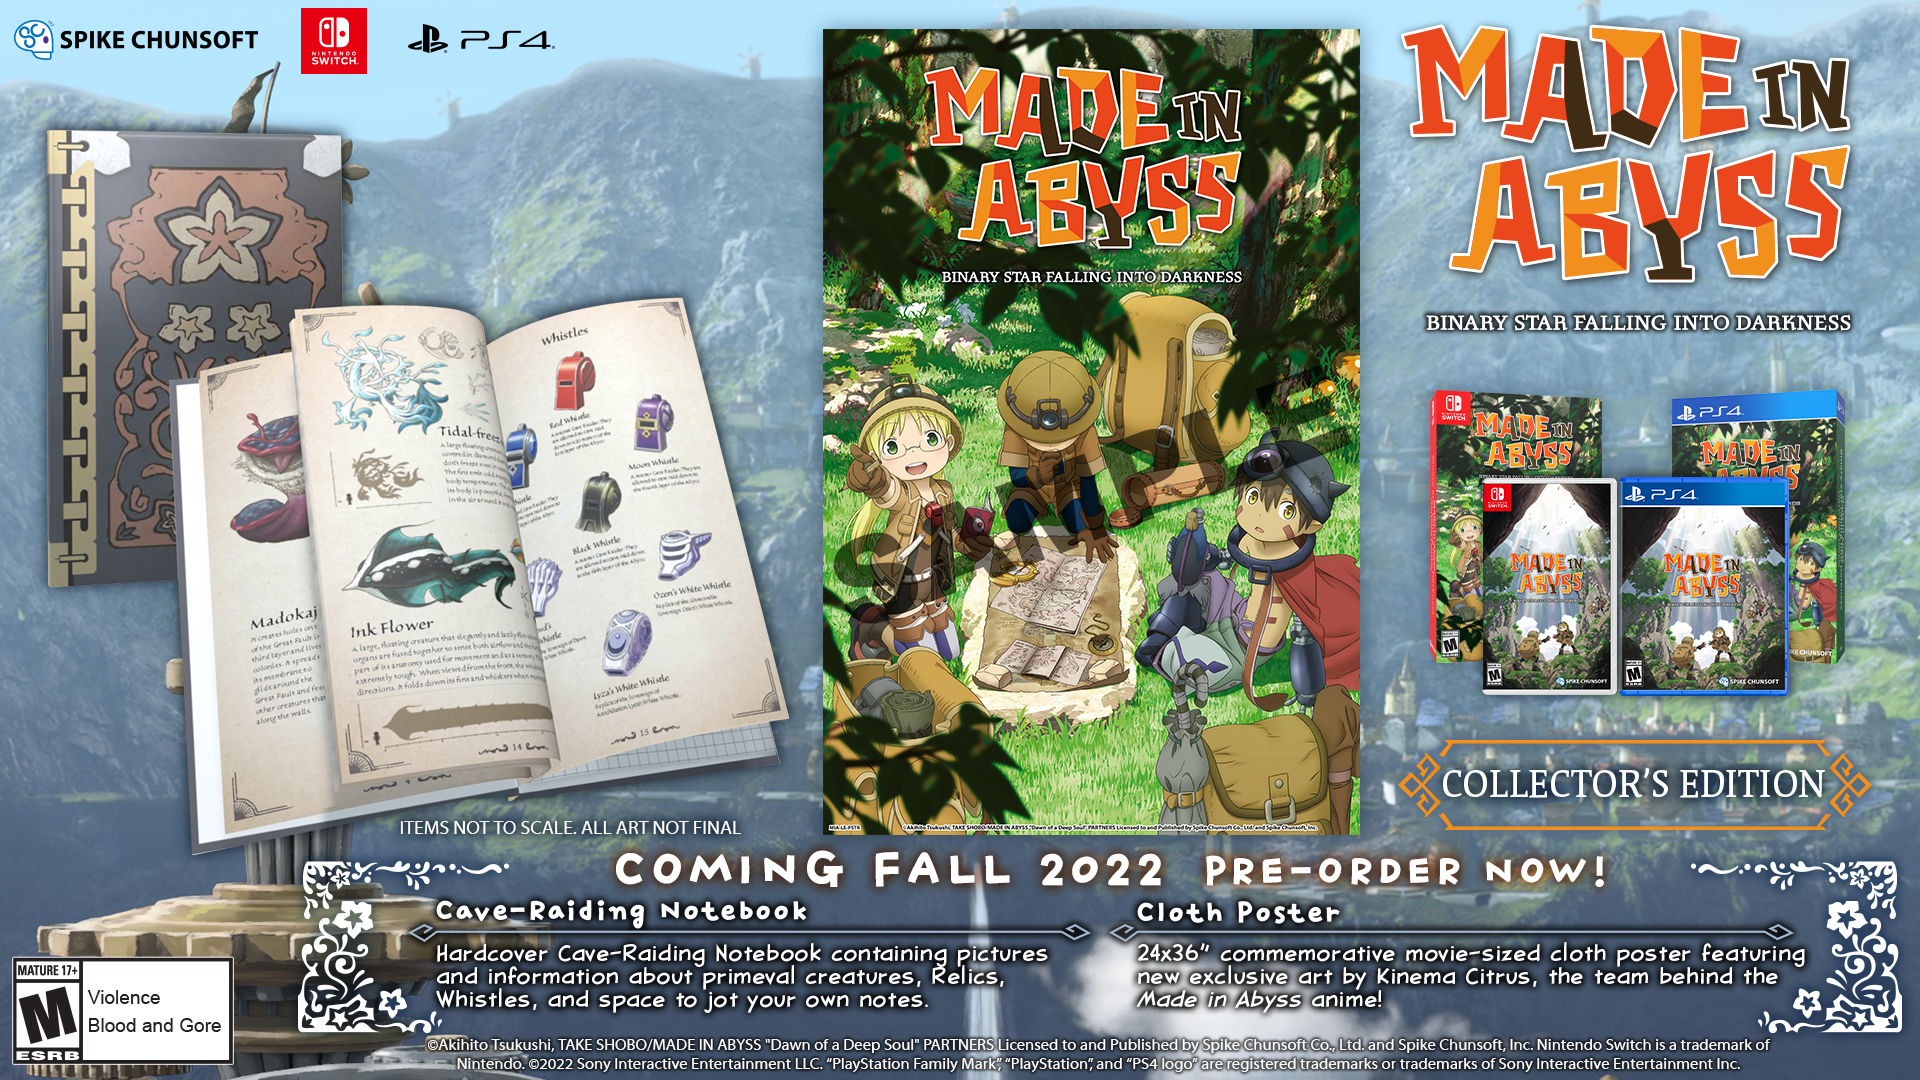 Made in Abyss: Binary Star Falling into Darkness out this fall, new trailer